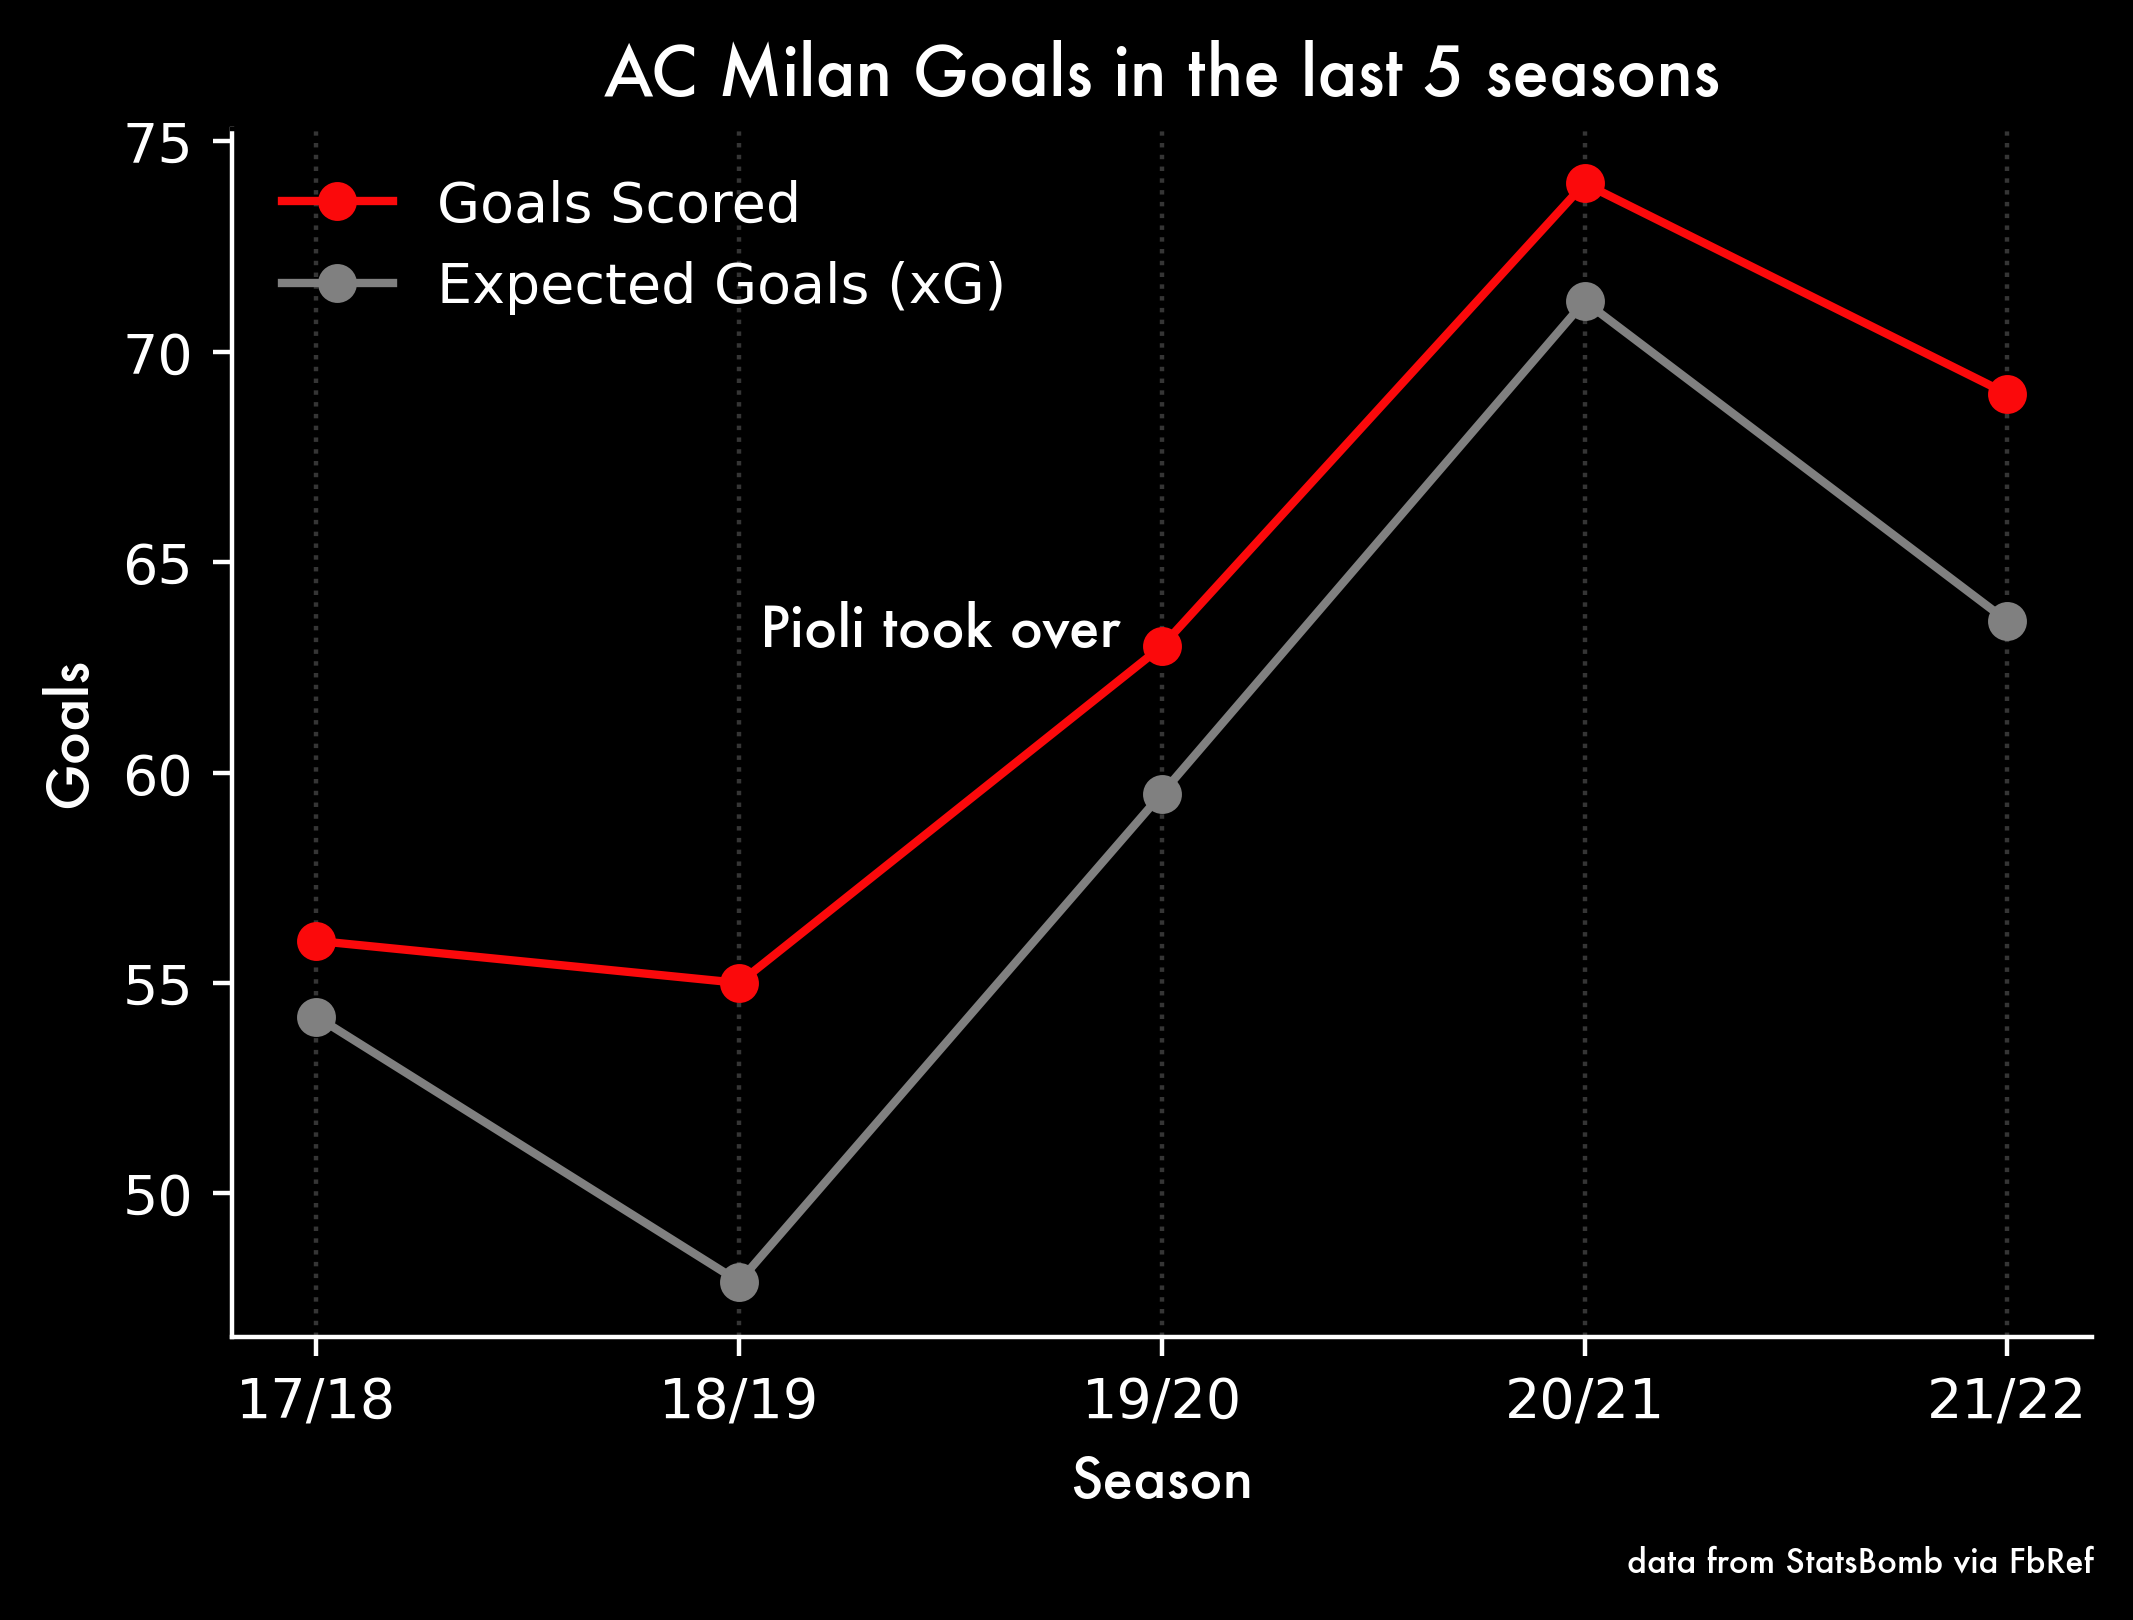 AC Milan Champions of Italy 2021-22: The numbers from the season